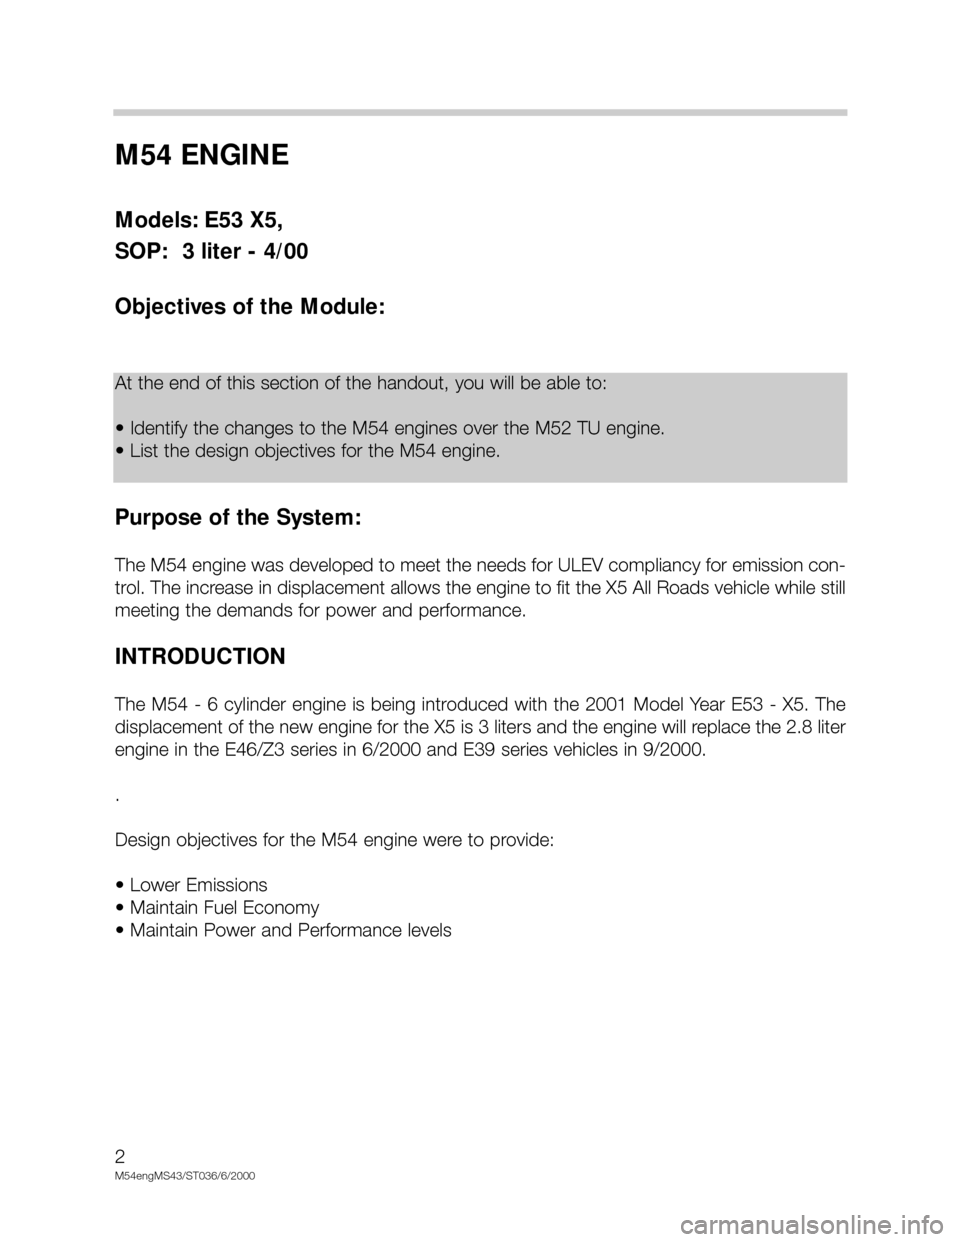 BMW X5 2004 E53 M54 Engine Workshop Manual M54 ENGINE 
Models: E53 X5, 
SOP:  3 liter - 4/00
Objectives of the Module:
Purpose of the System:
The M54 engine was developed to meet the needs for ULEV compliancy for emission con-
trol. The increa